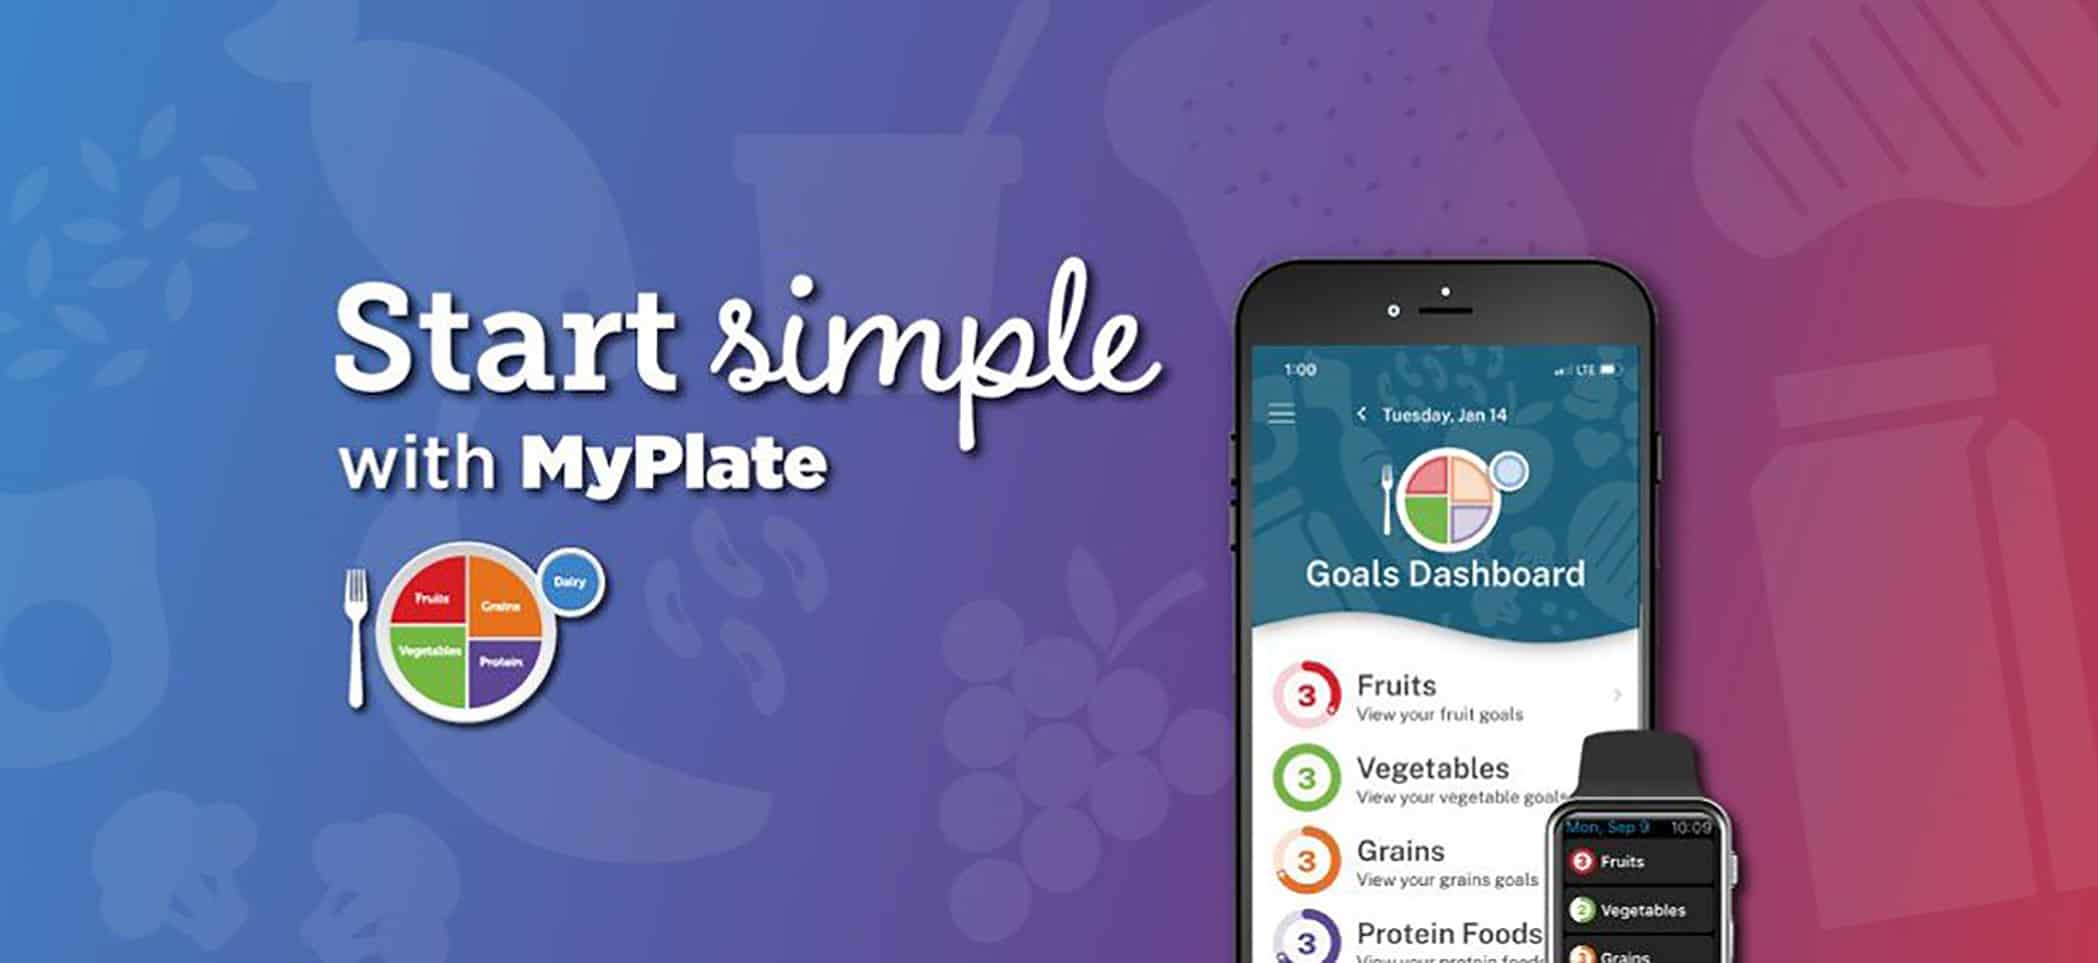 Start simple with MyPlate